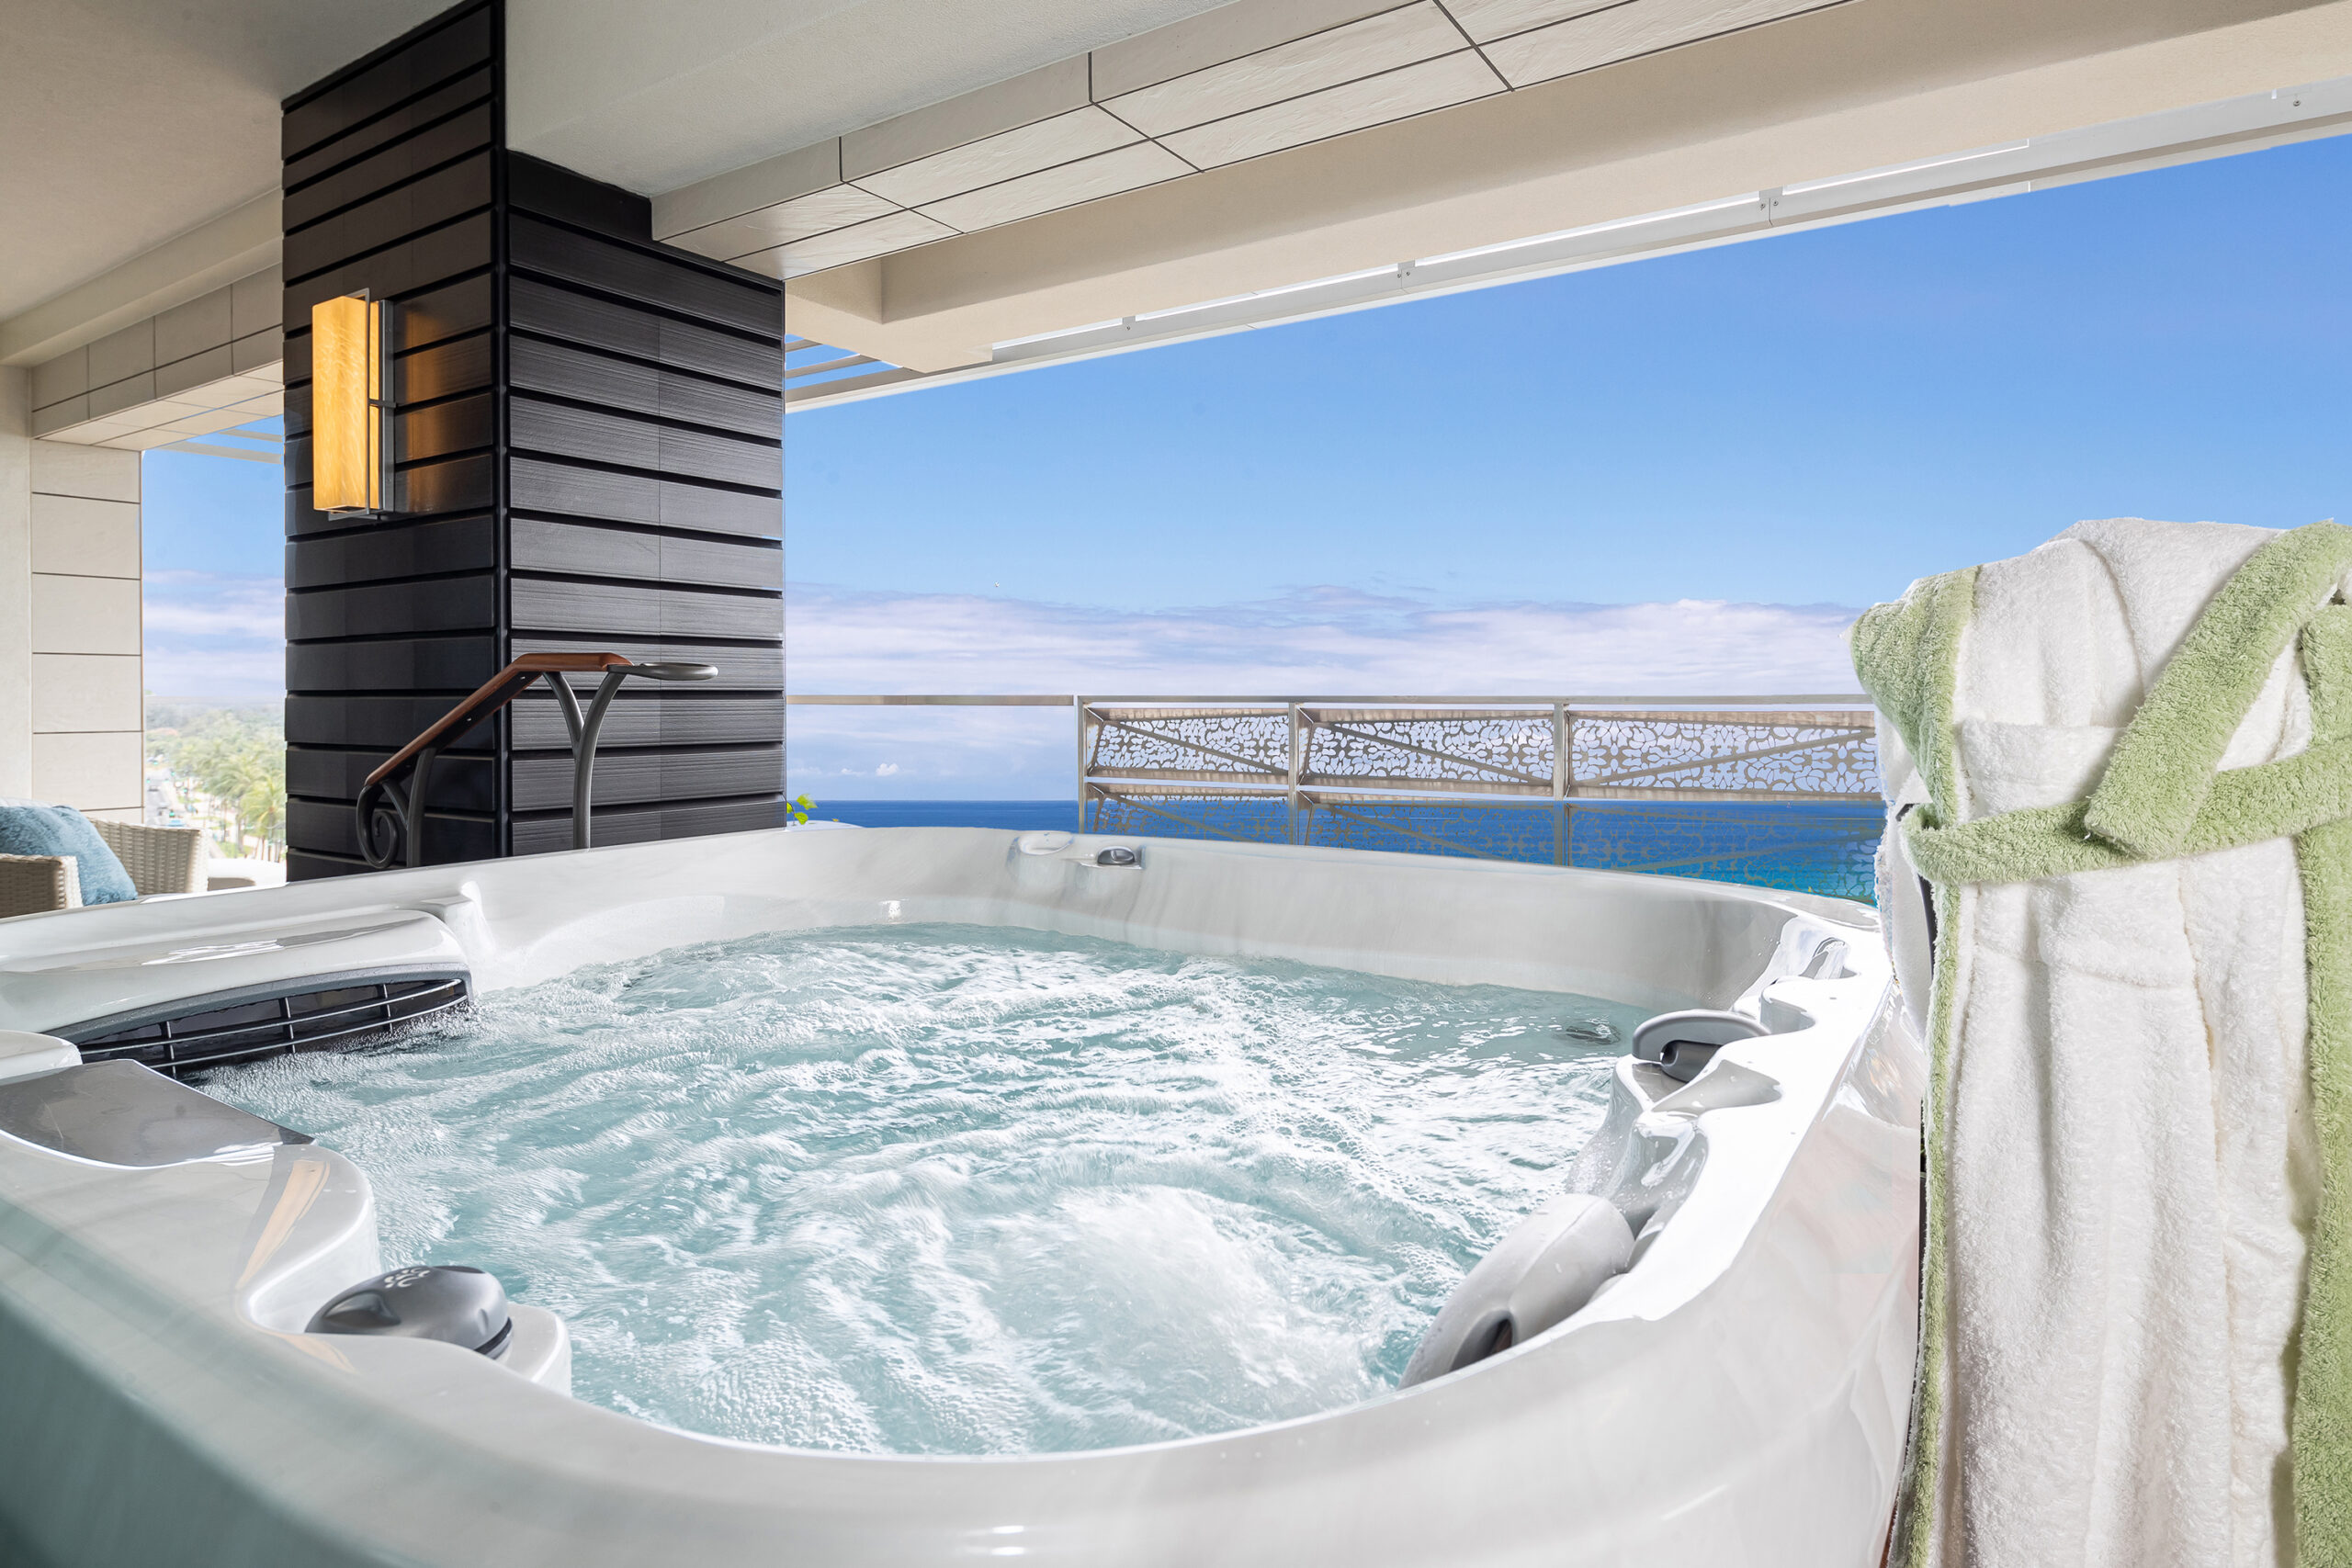 Jacuzzi on balcony with ocean view.